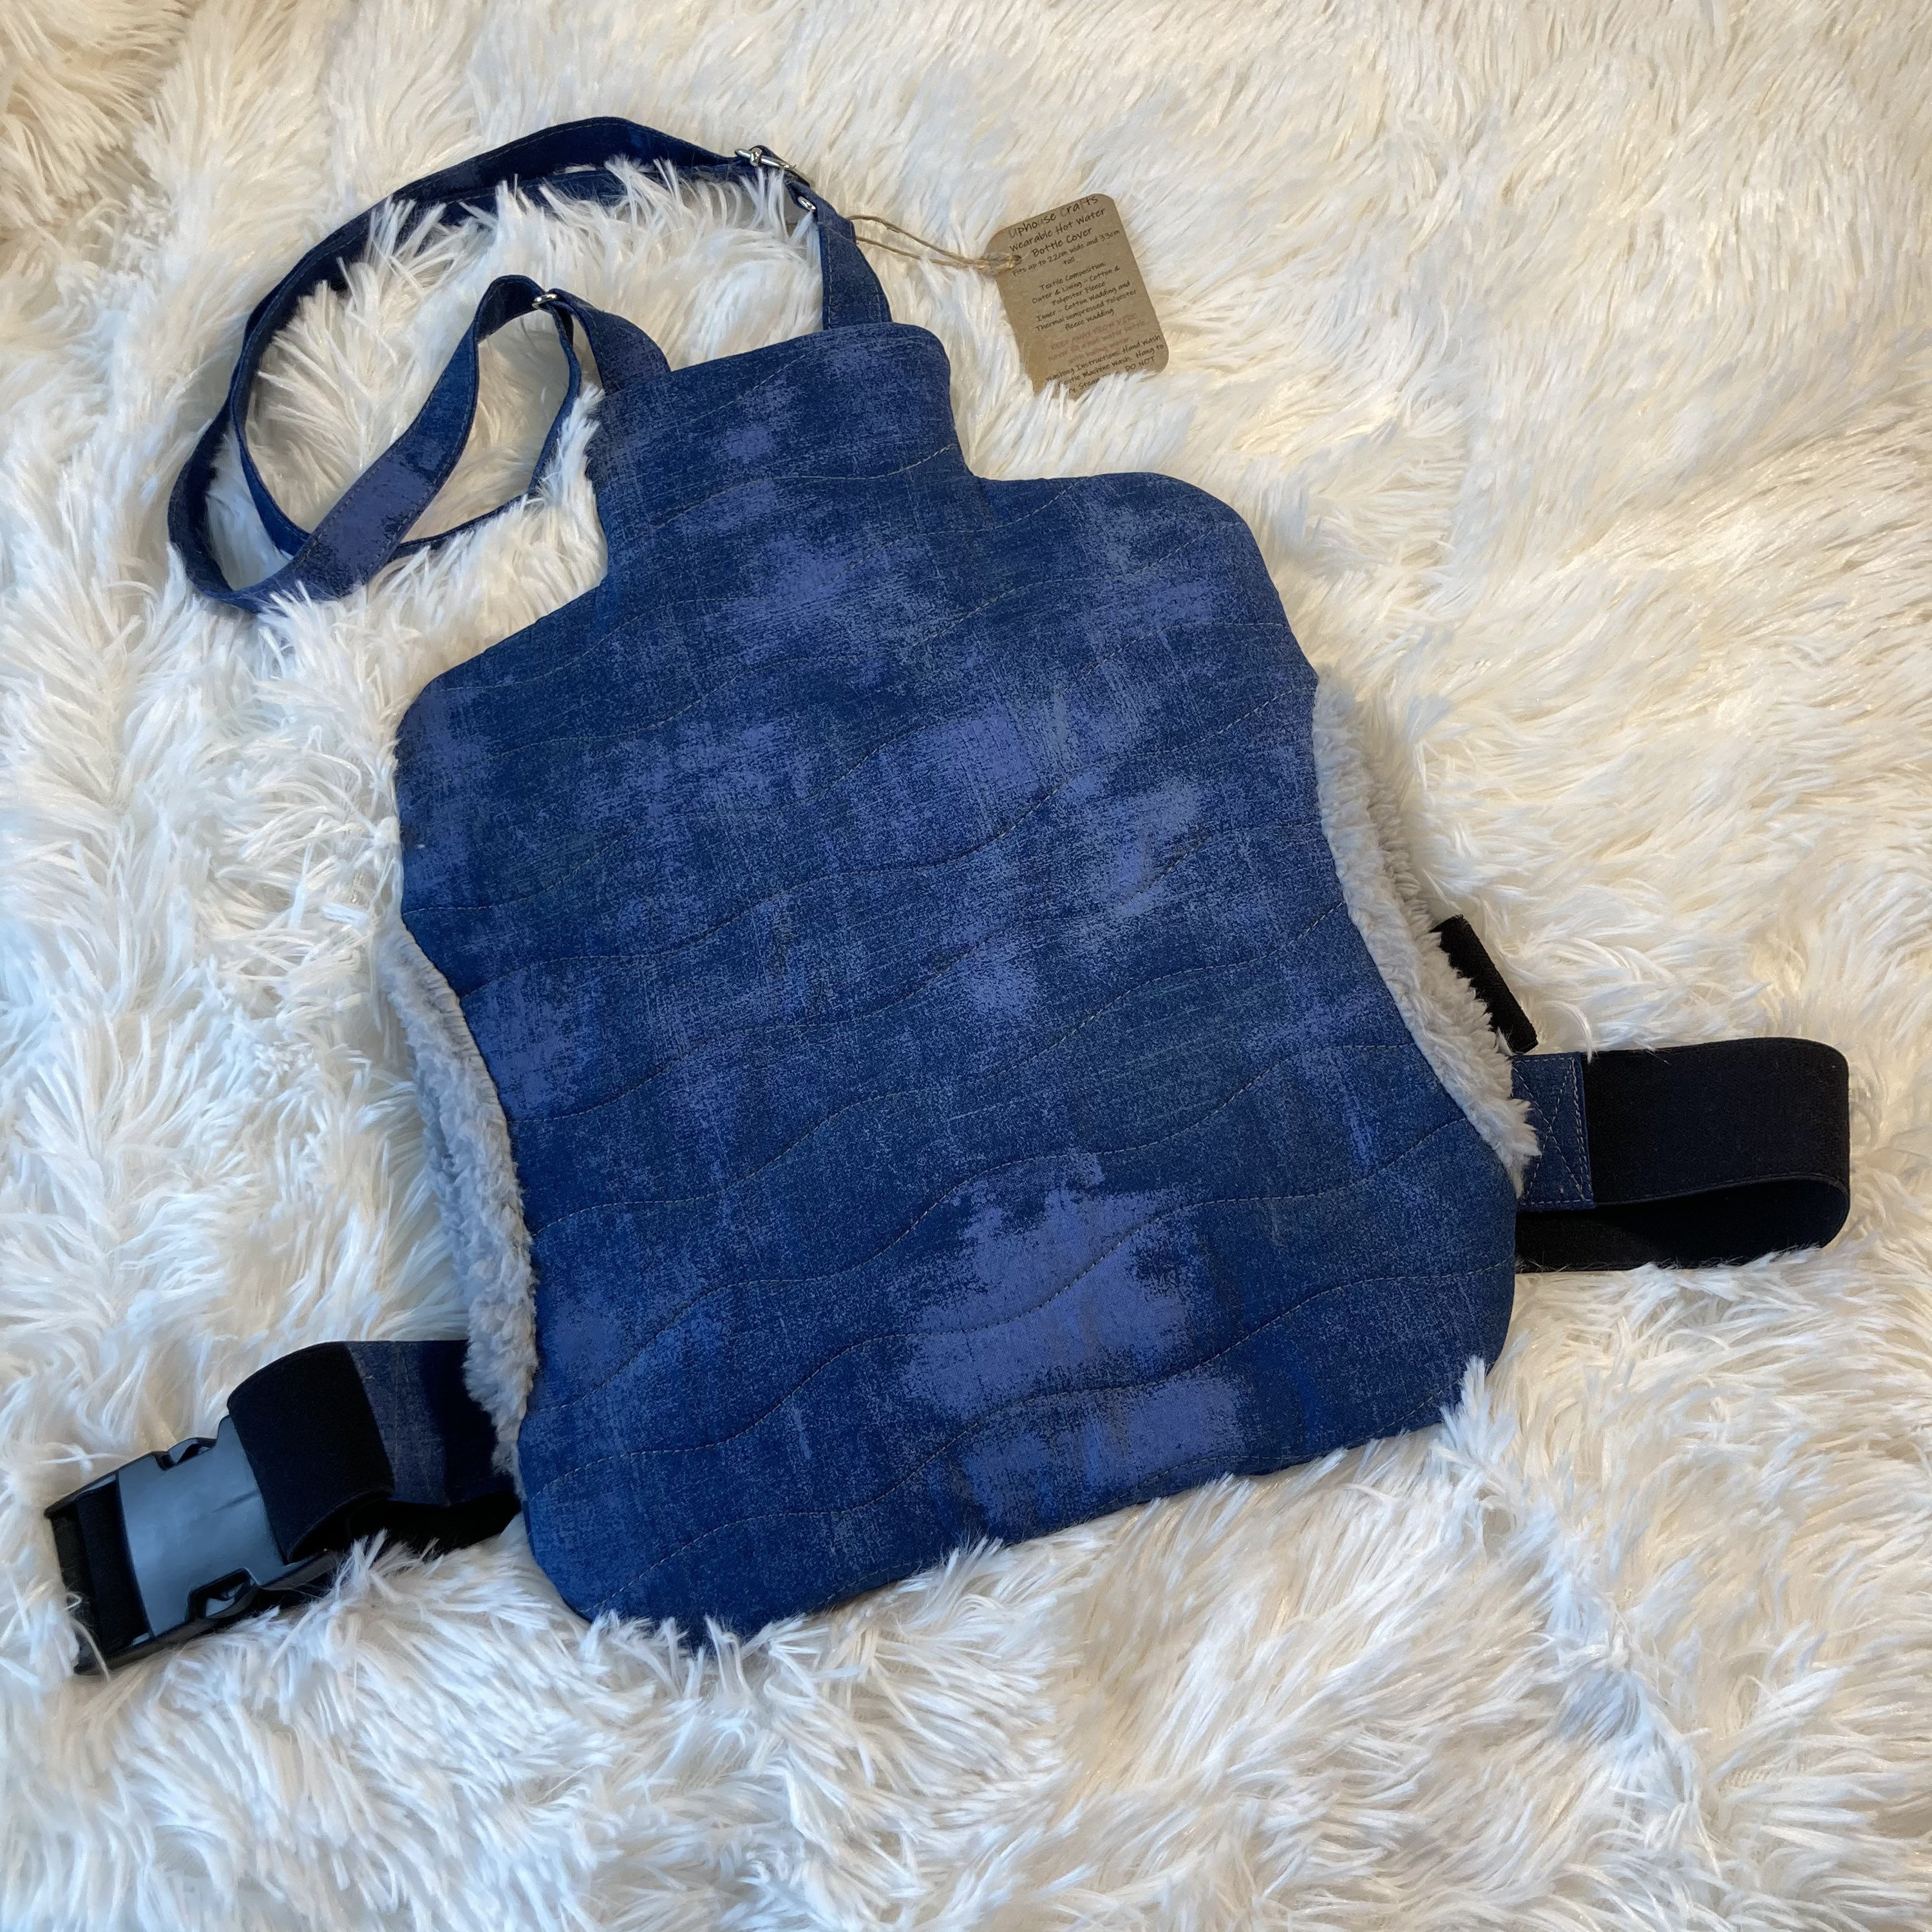 How to make a Quilted Hot-Water bottle cover! — MADE JUST SEW